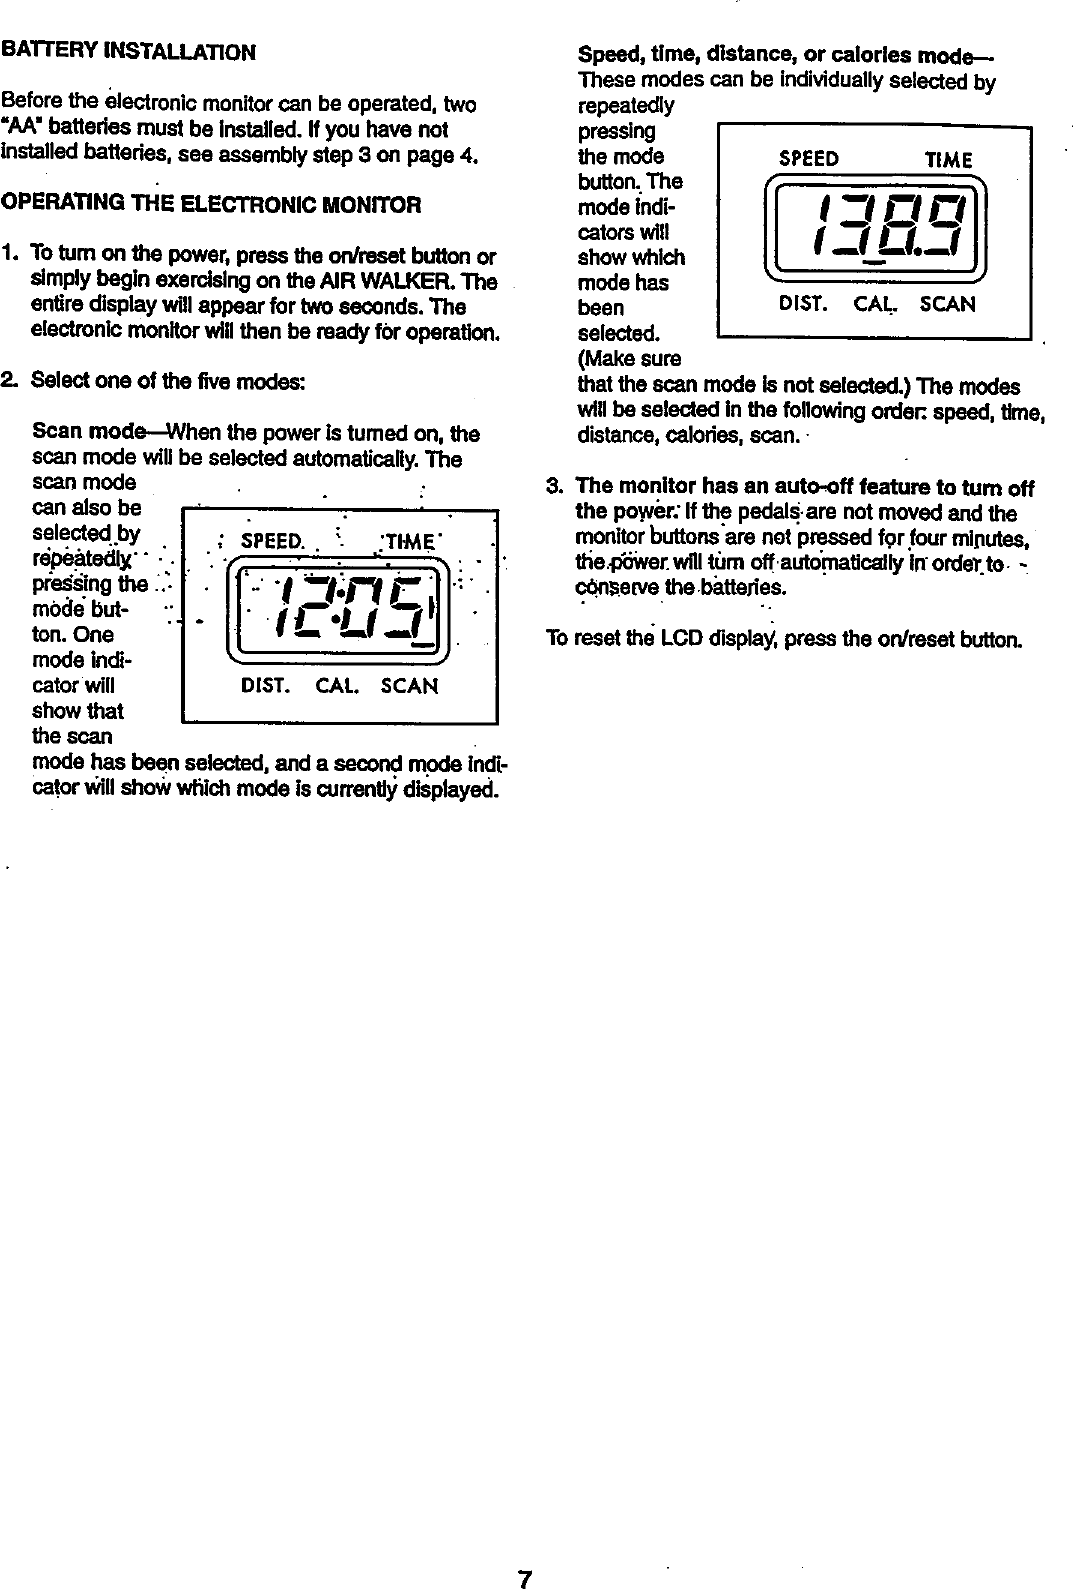 Page 7 of 12 - Proform 831290841 User Manual  AIR WALKER - Manuals And Guides 99020075